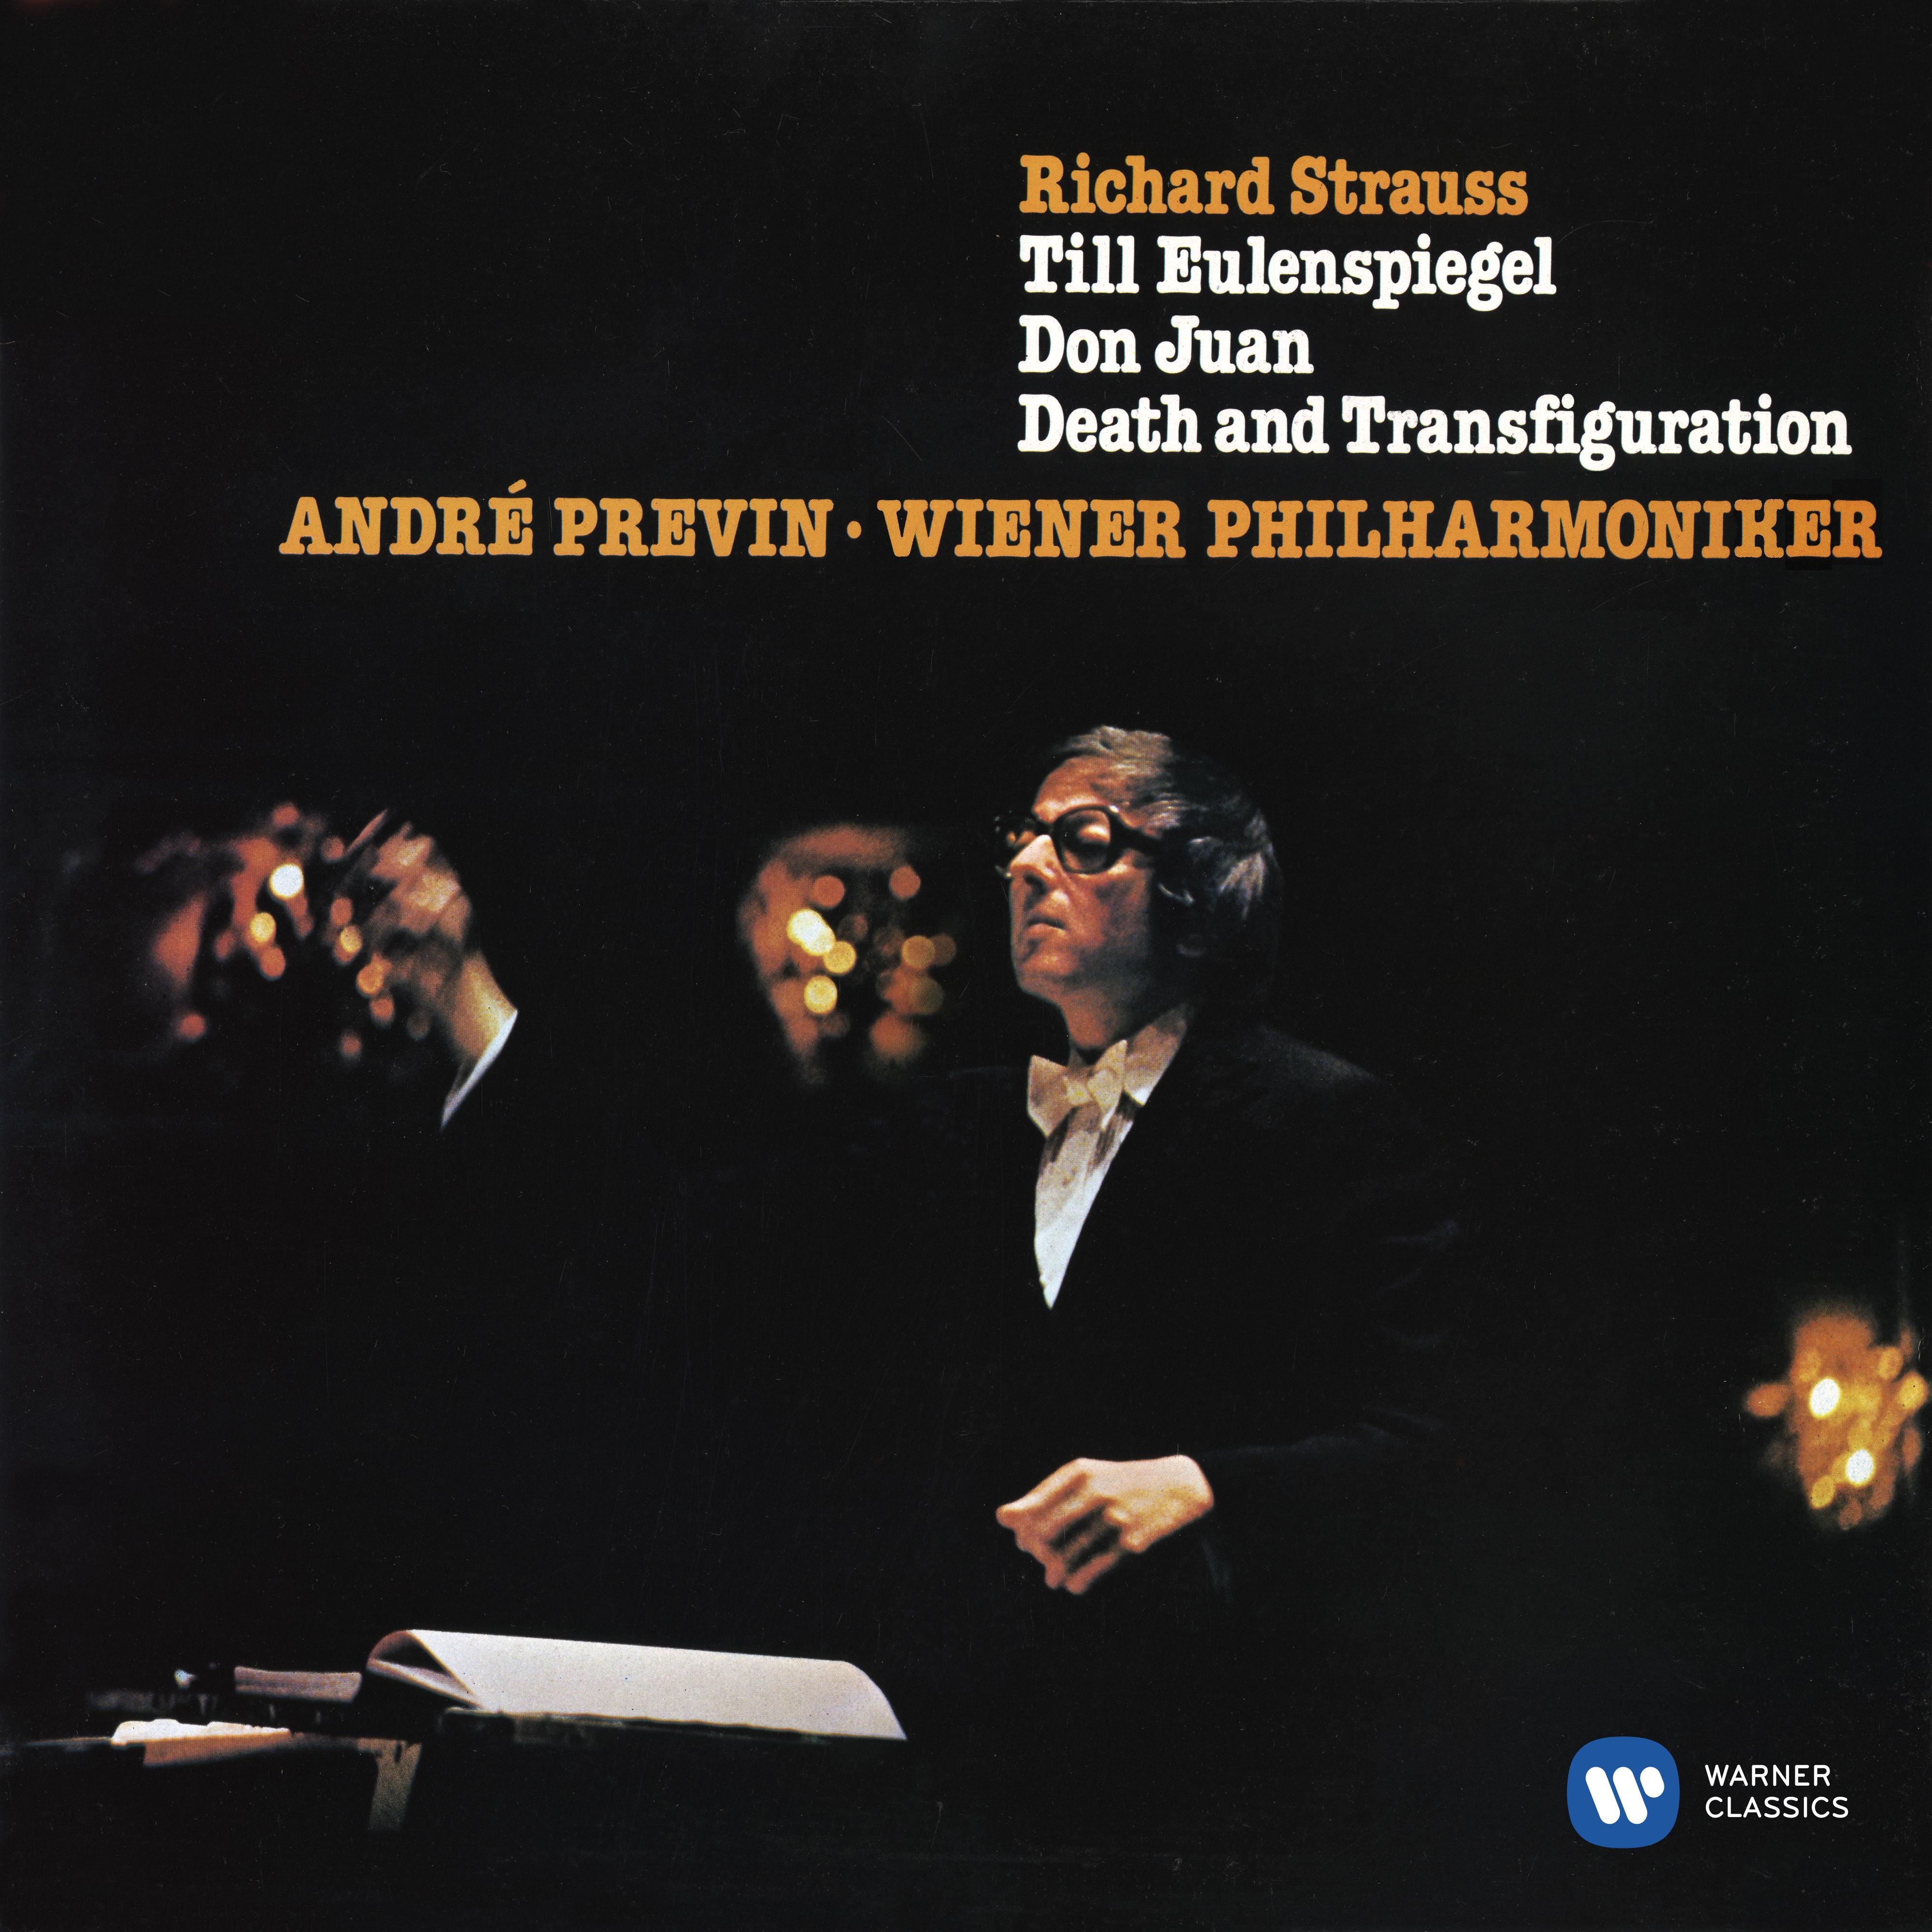 Death and Transfiguration, Op. 24